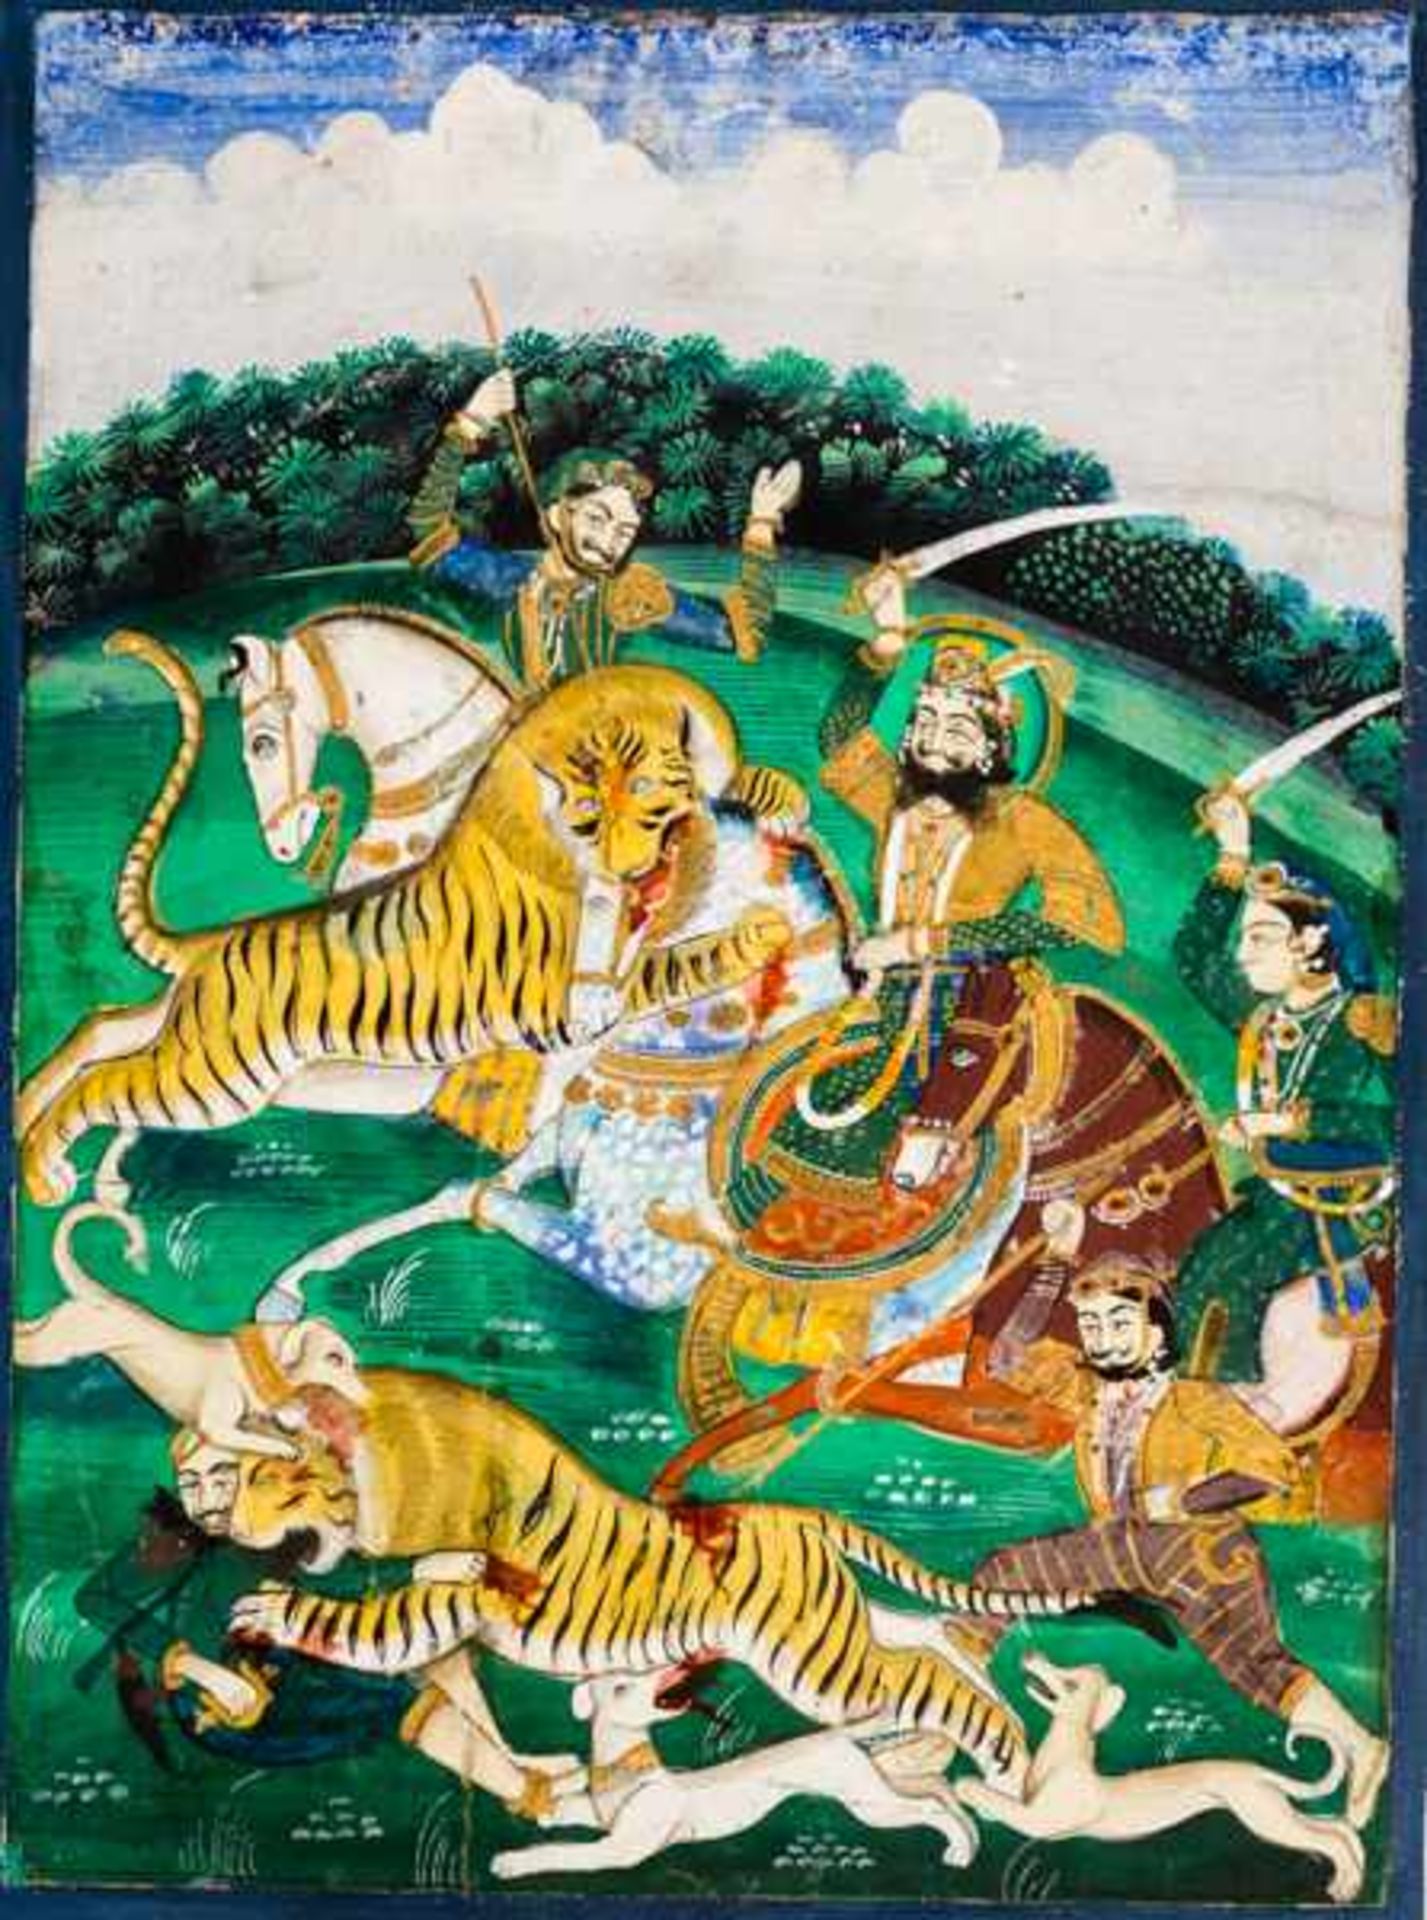 TIGER-HUNT Paint on paper, gilding. India, Punjab, about 1800A dramatic scene with a full-bearded,